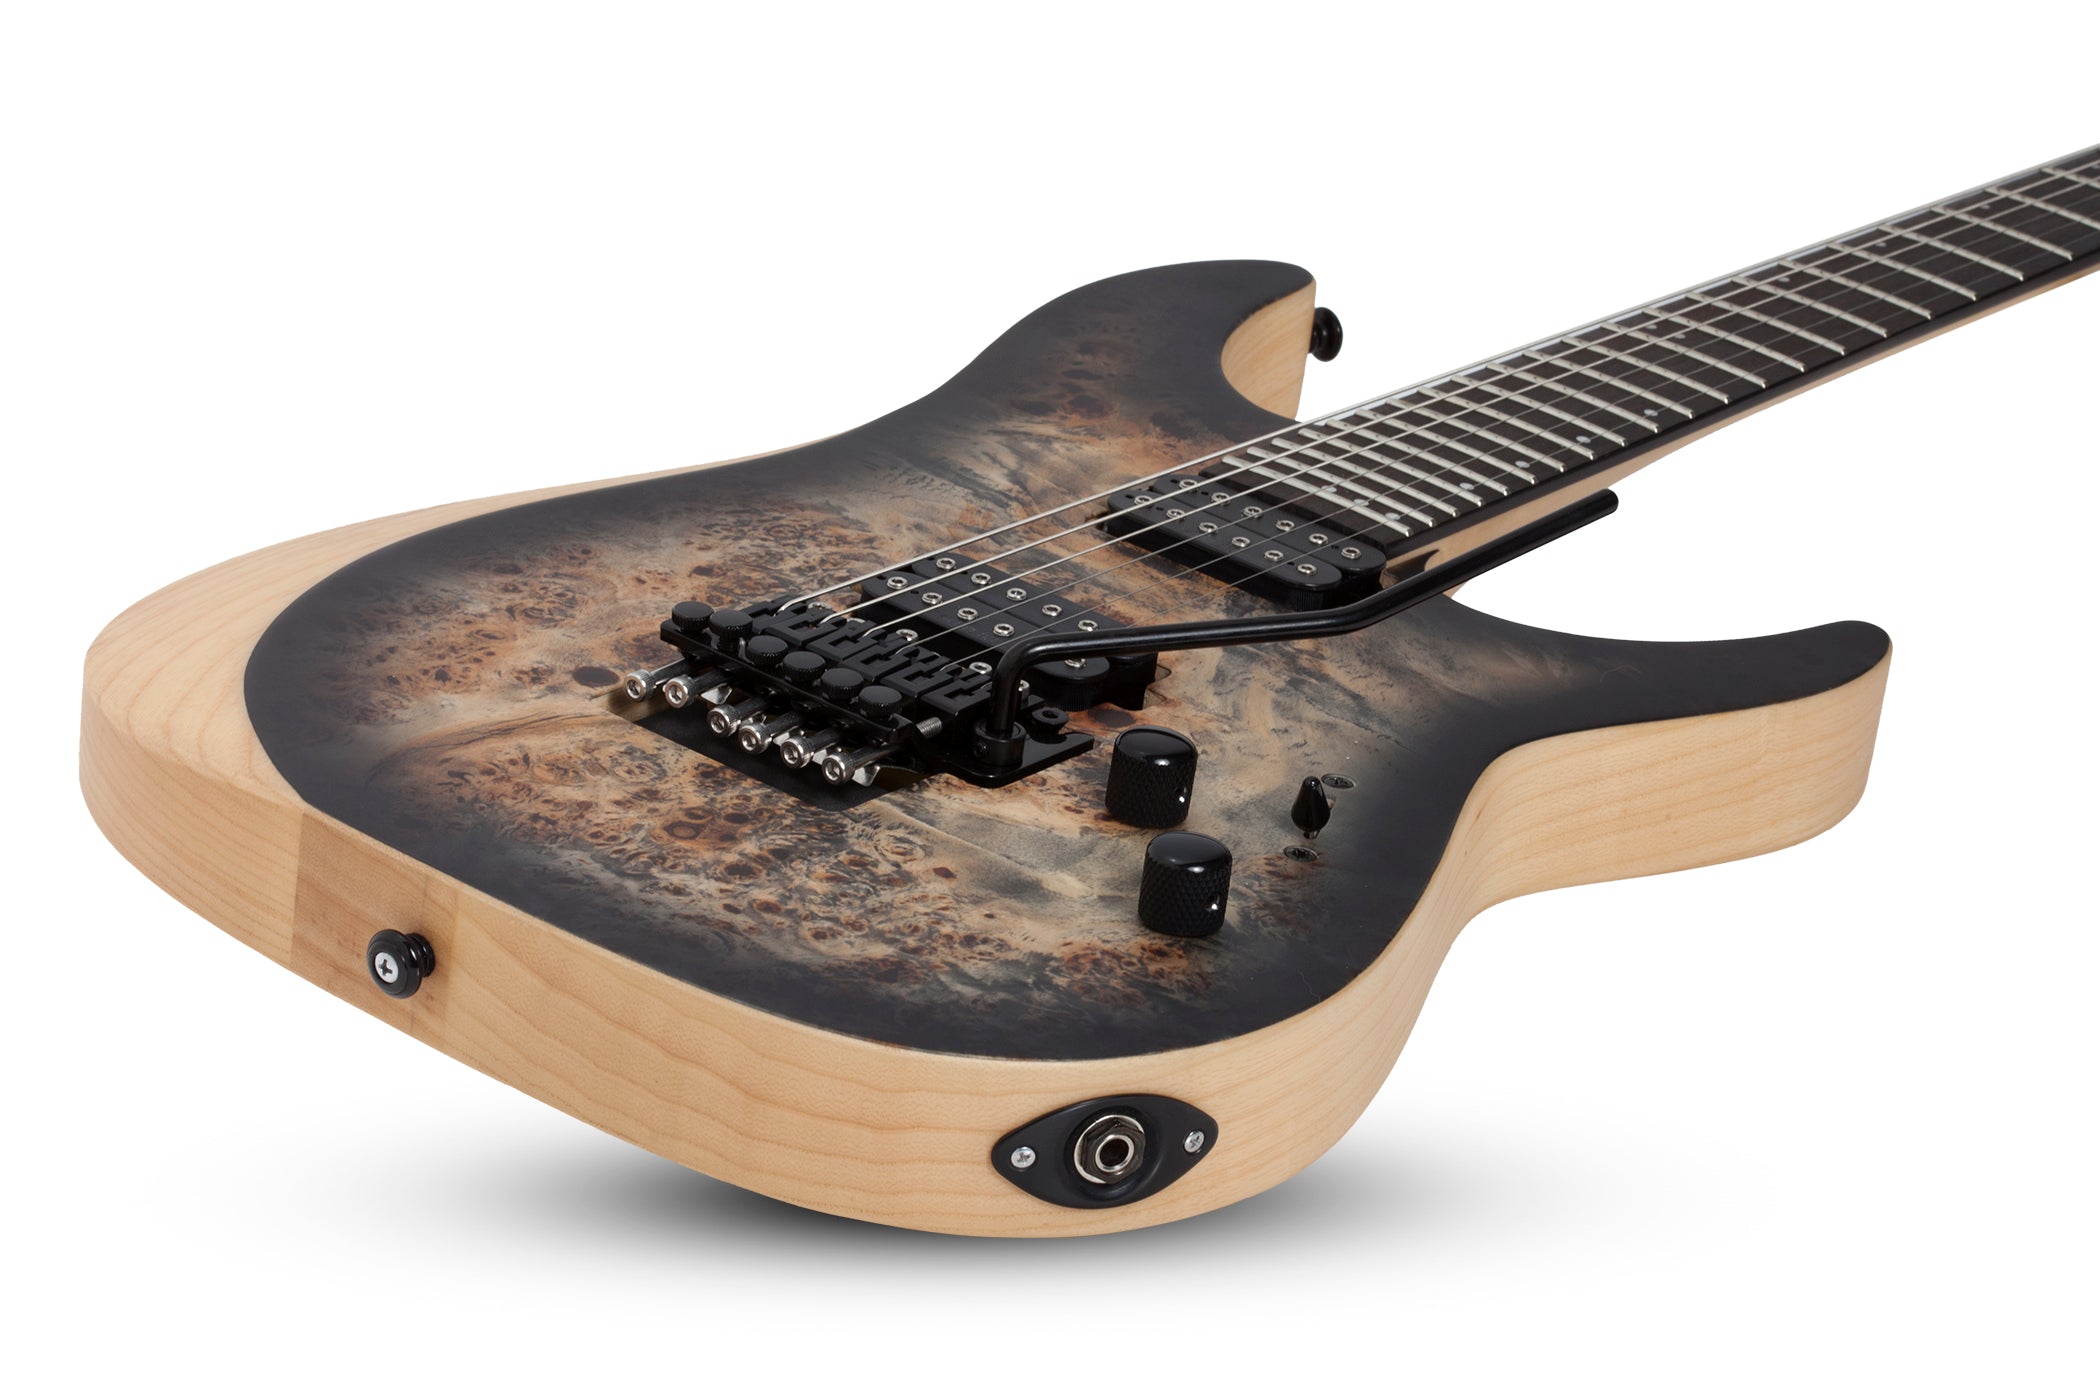 SCHECTER REAPER-6 FLYOD ROSE ELECTRIC GUITAR SATIN CHARCOAL BURST (1503) MADE IN INDONESIA, SCHECTER, ELECTRIC GUITAR, schecter-electric-guitar-reaper-6-fr-scb, ZOSO MUSIC SDN BHD